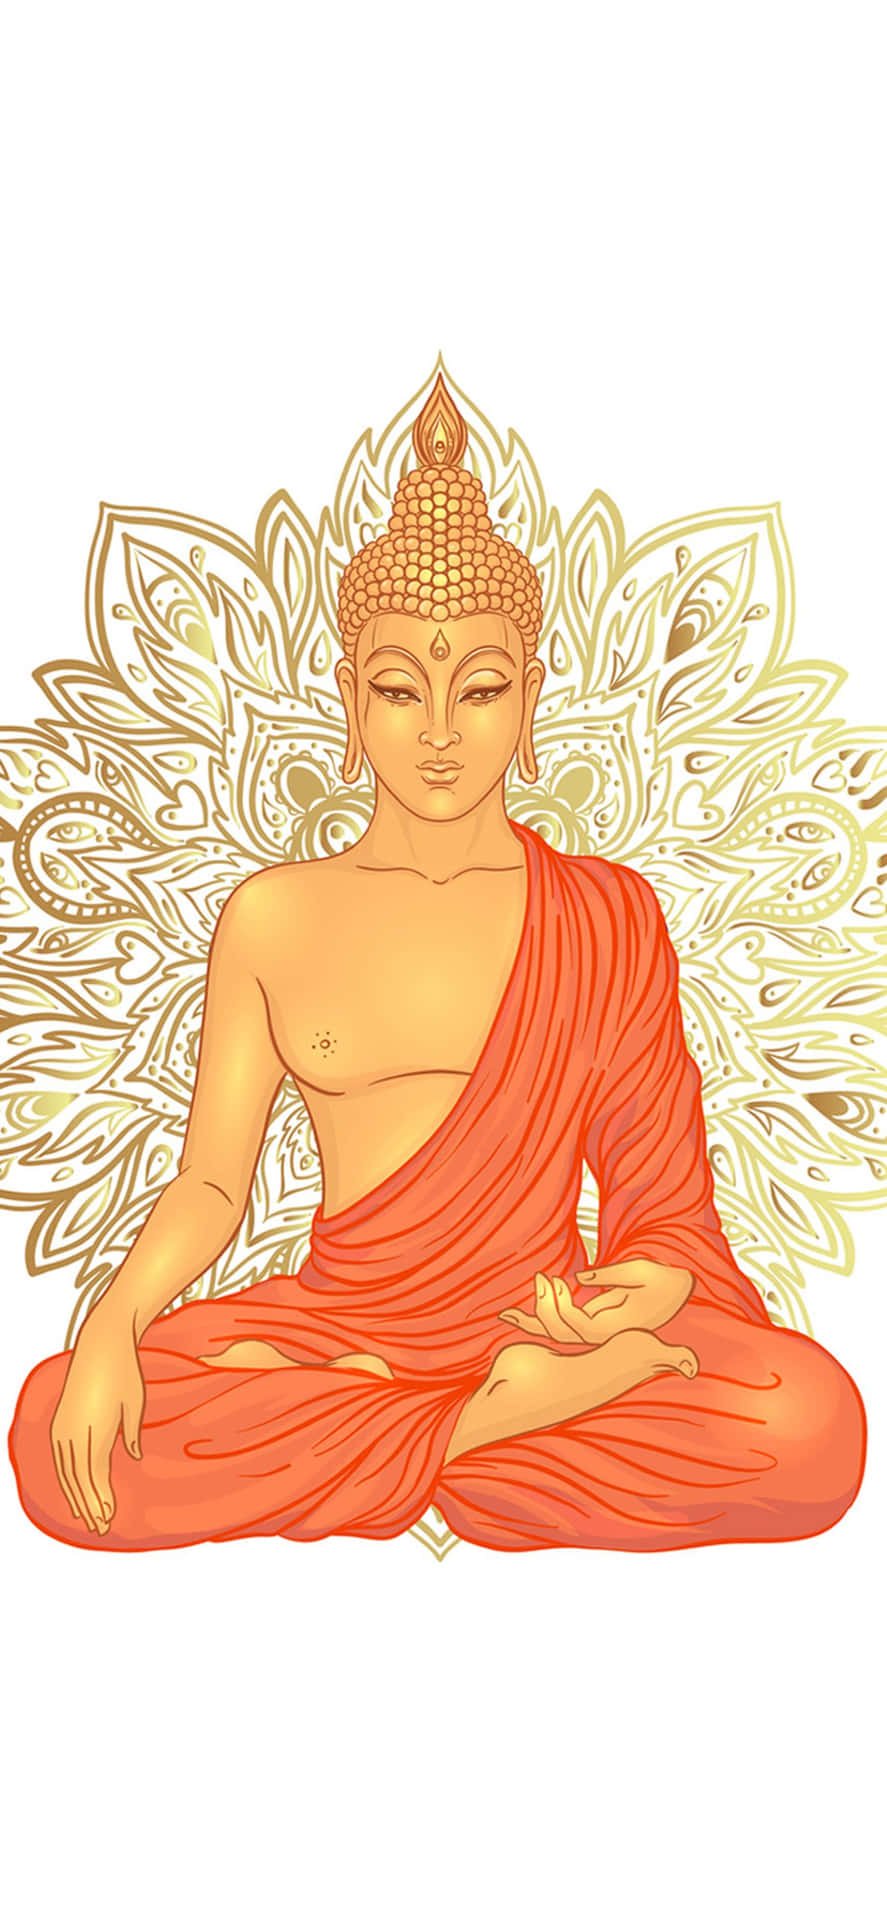 Lord Buddha Wallpapers HD - Apps on Google Play